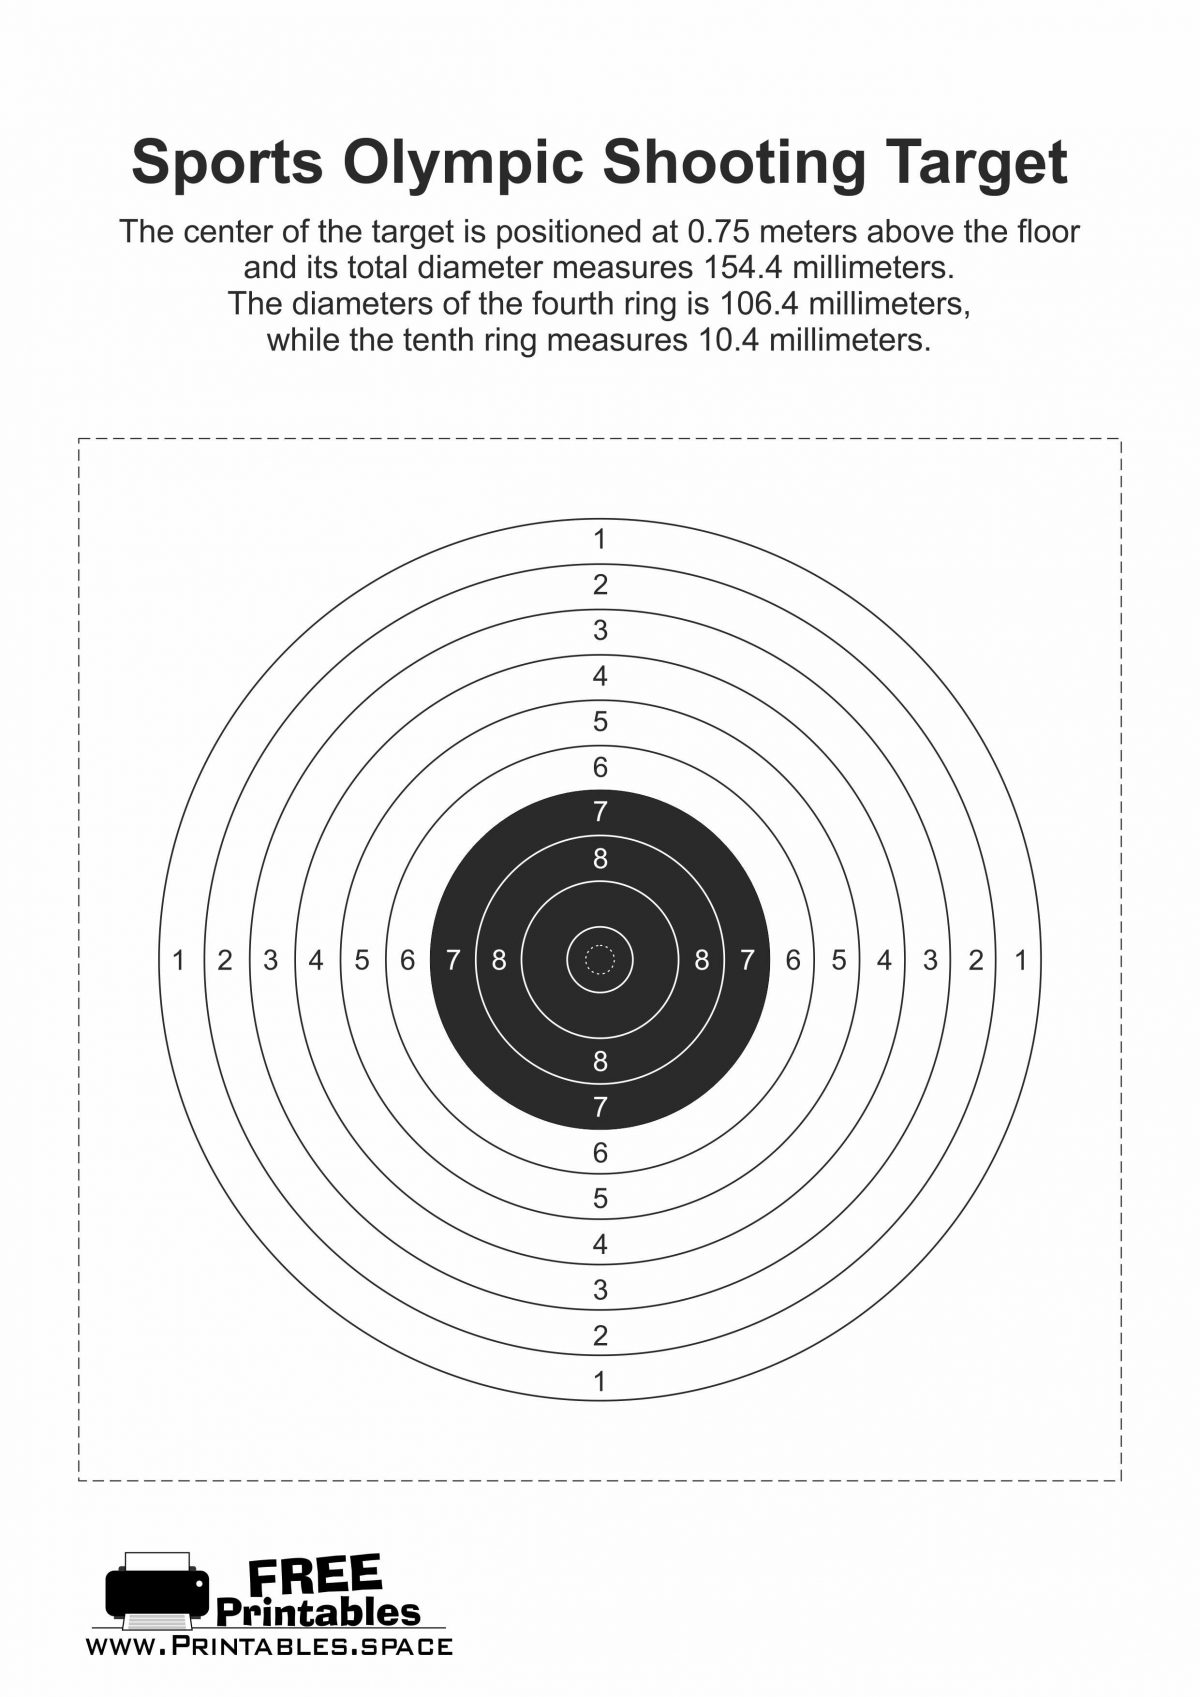 Sports Olympic Shooting Target